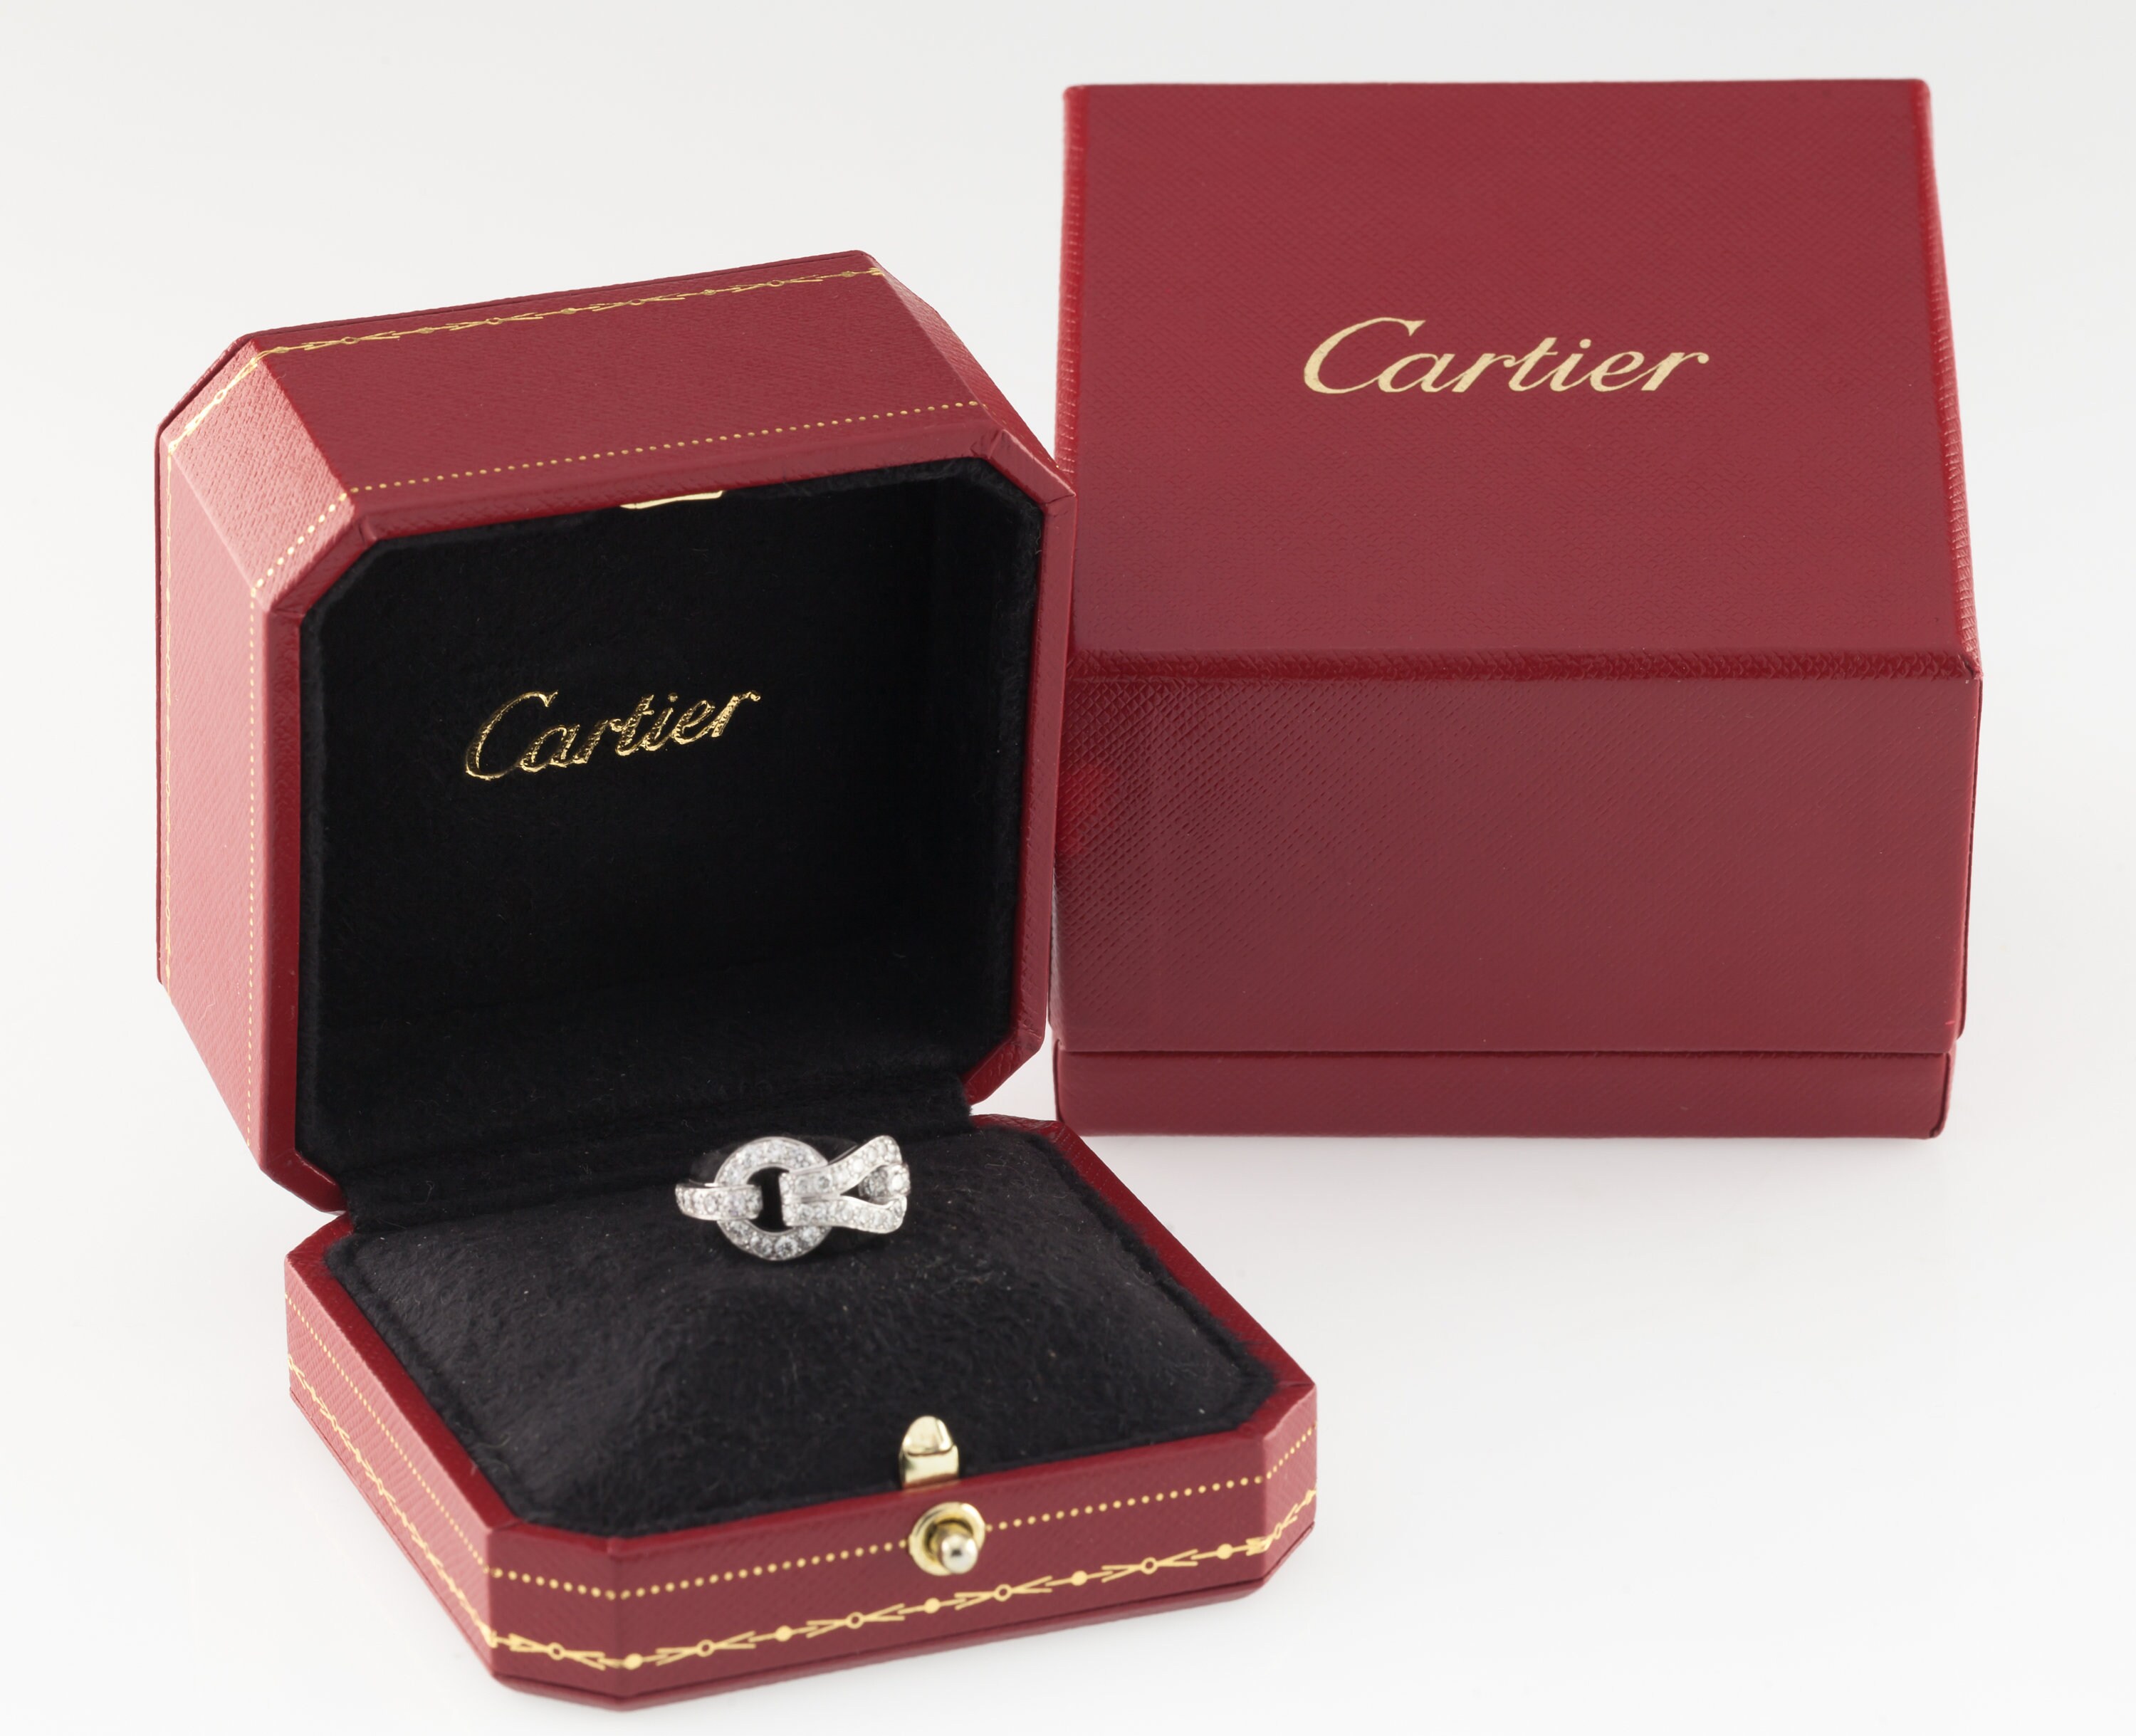 Authentic Cartier 18K White Gold Small Diamond Love Ring, Size 50 In Box |  Lupon.Gov.Ph